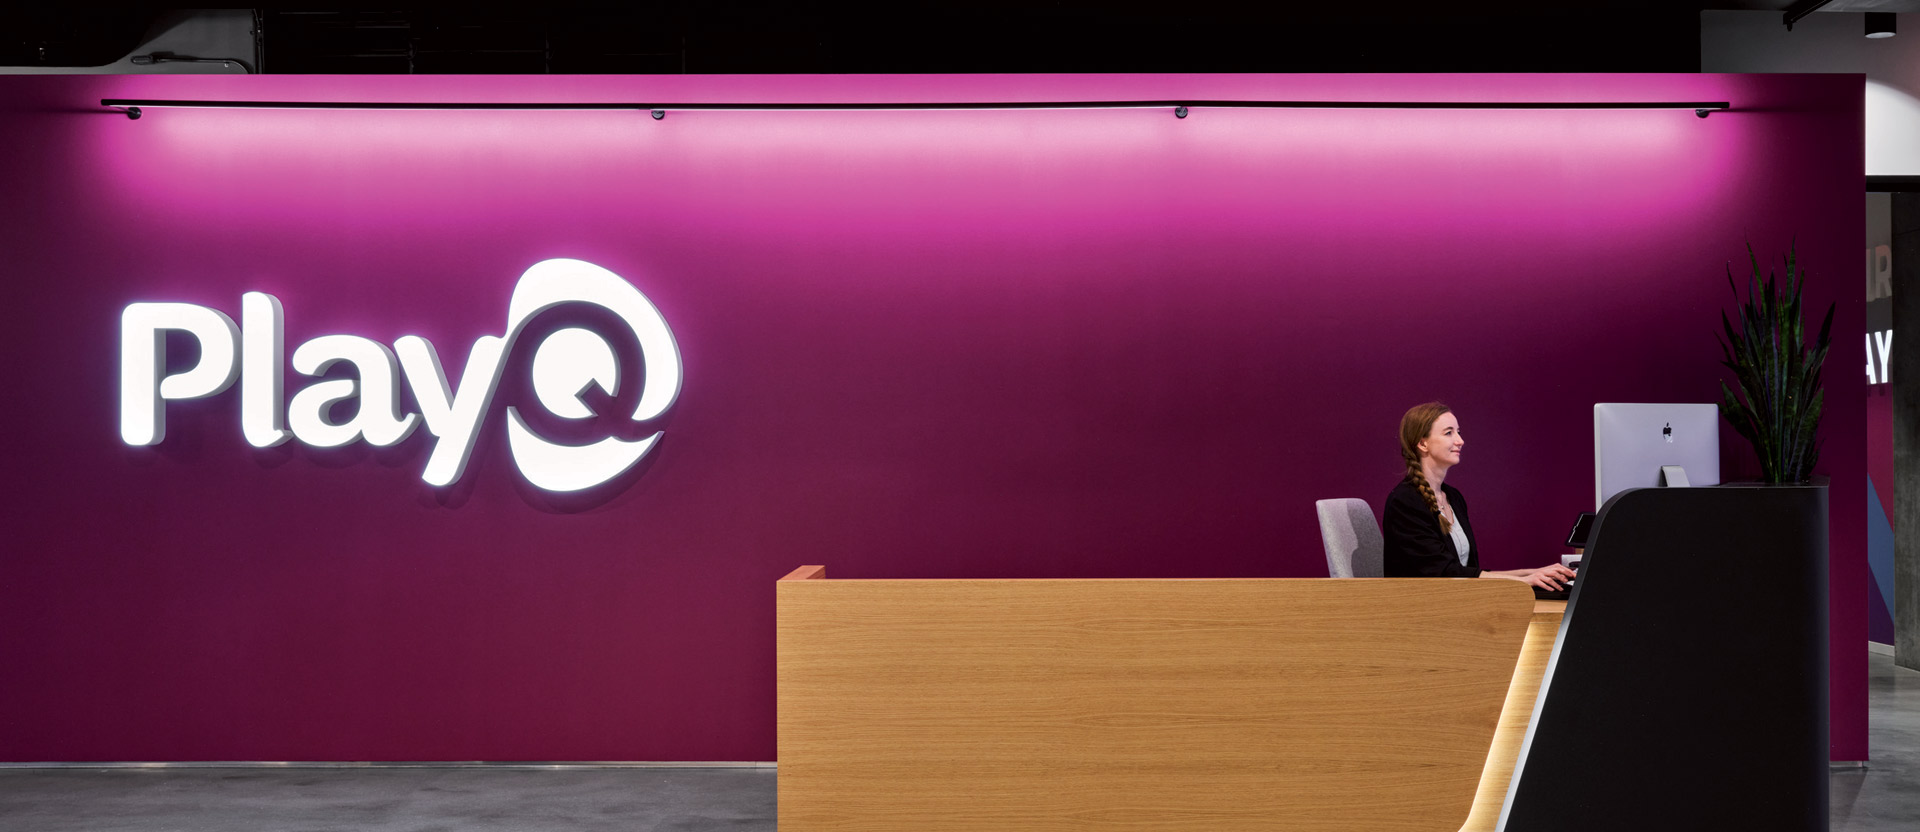 A sleek reception area featuring a wooden desk with a person seated, illuminated by a vibrant pink backlit wall showcasing the 'Play' logo, creating a dynamic corporate ambiance.